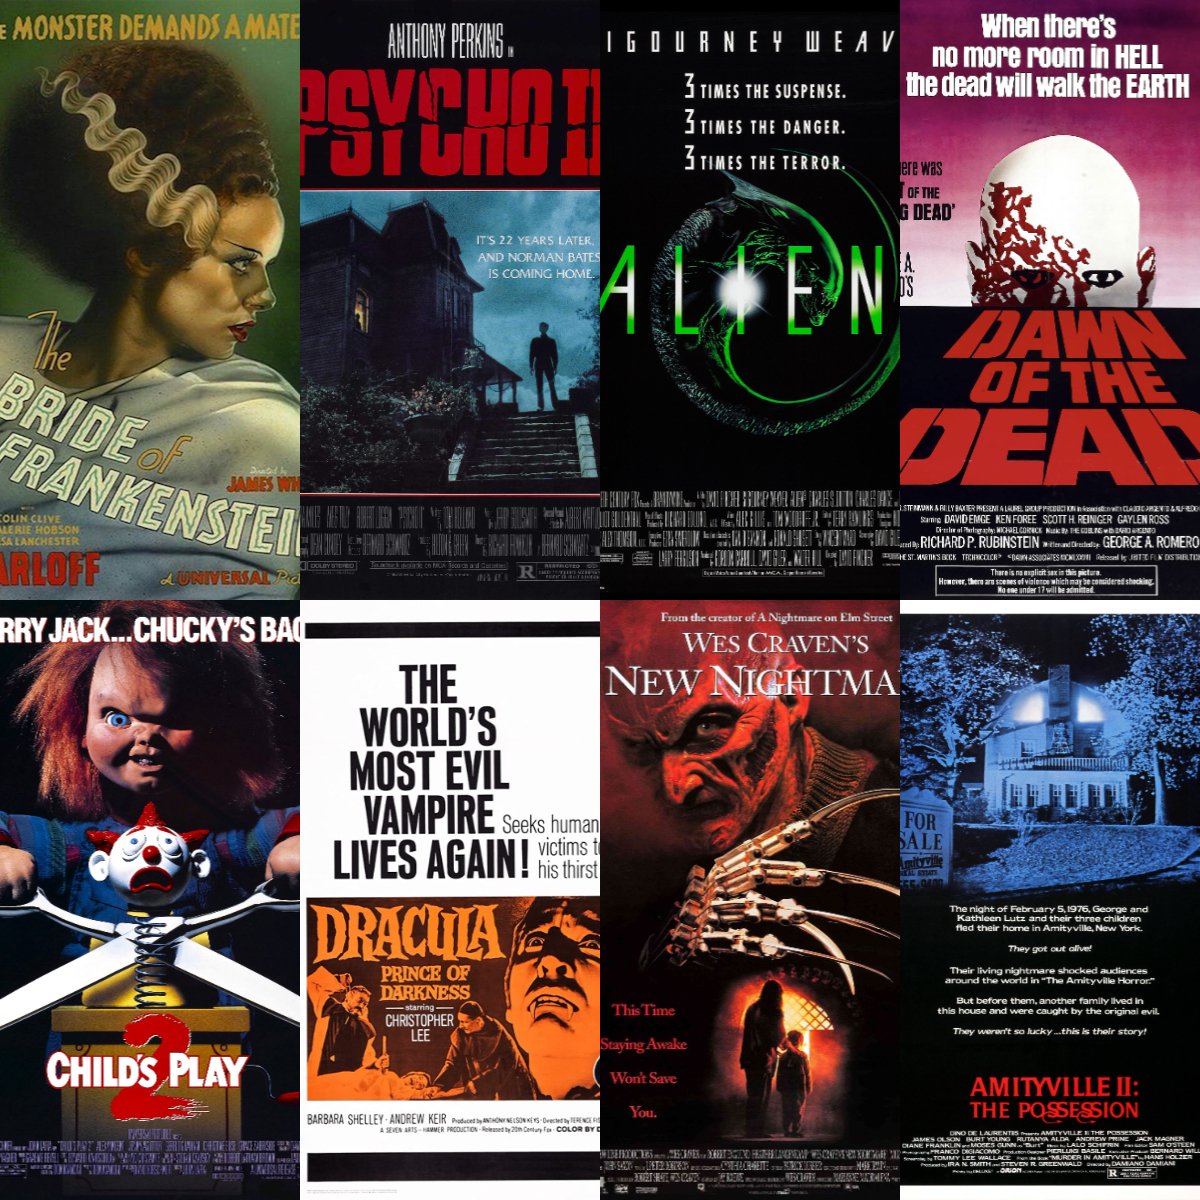 What is your favourite #horror #movie sequel of the 20th century?

Failing that you can even give me a top 3/5/10/whatever you wish

#HorrorMovies #movies #sequels #HorrorFamily #30s #40s #50s #60s #70s #80s #90s #70smovies #80smovies #80smovie #90smovies